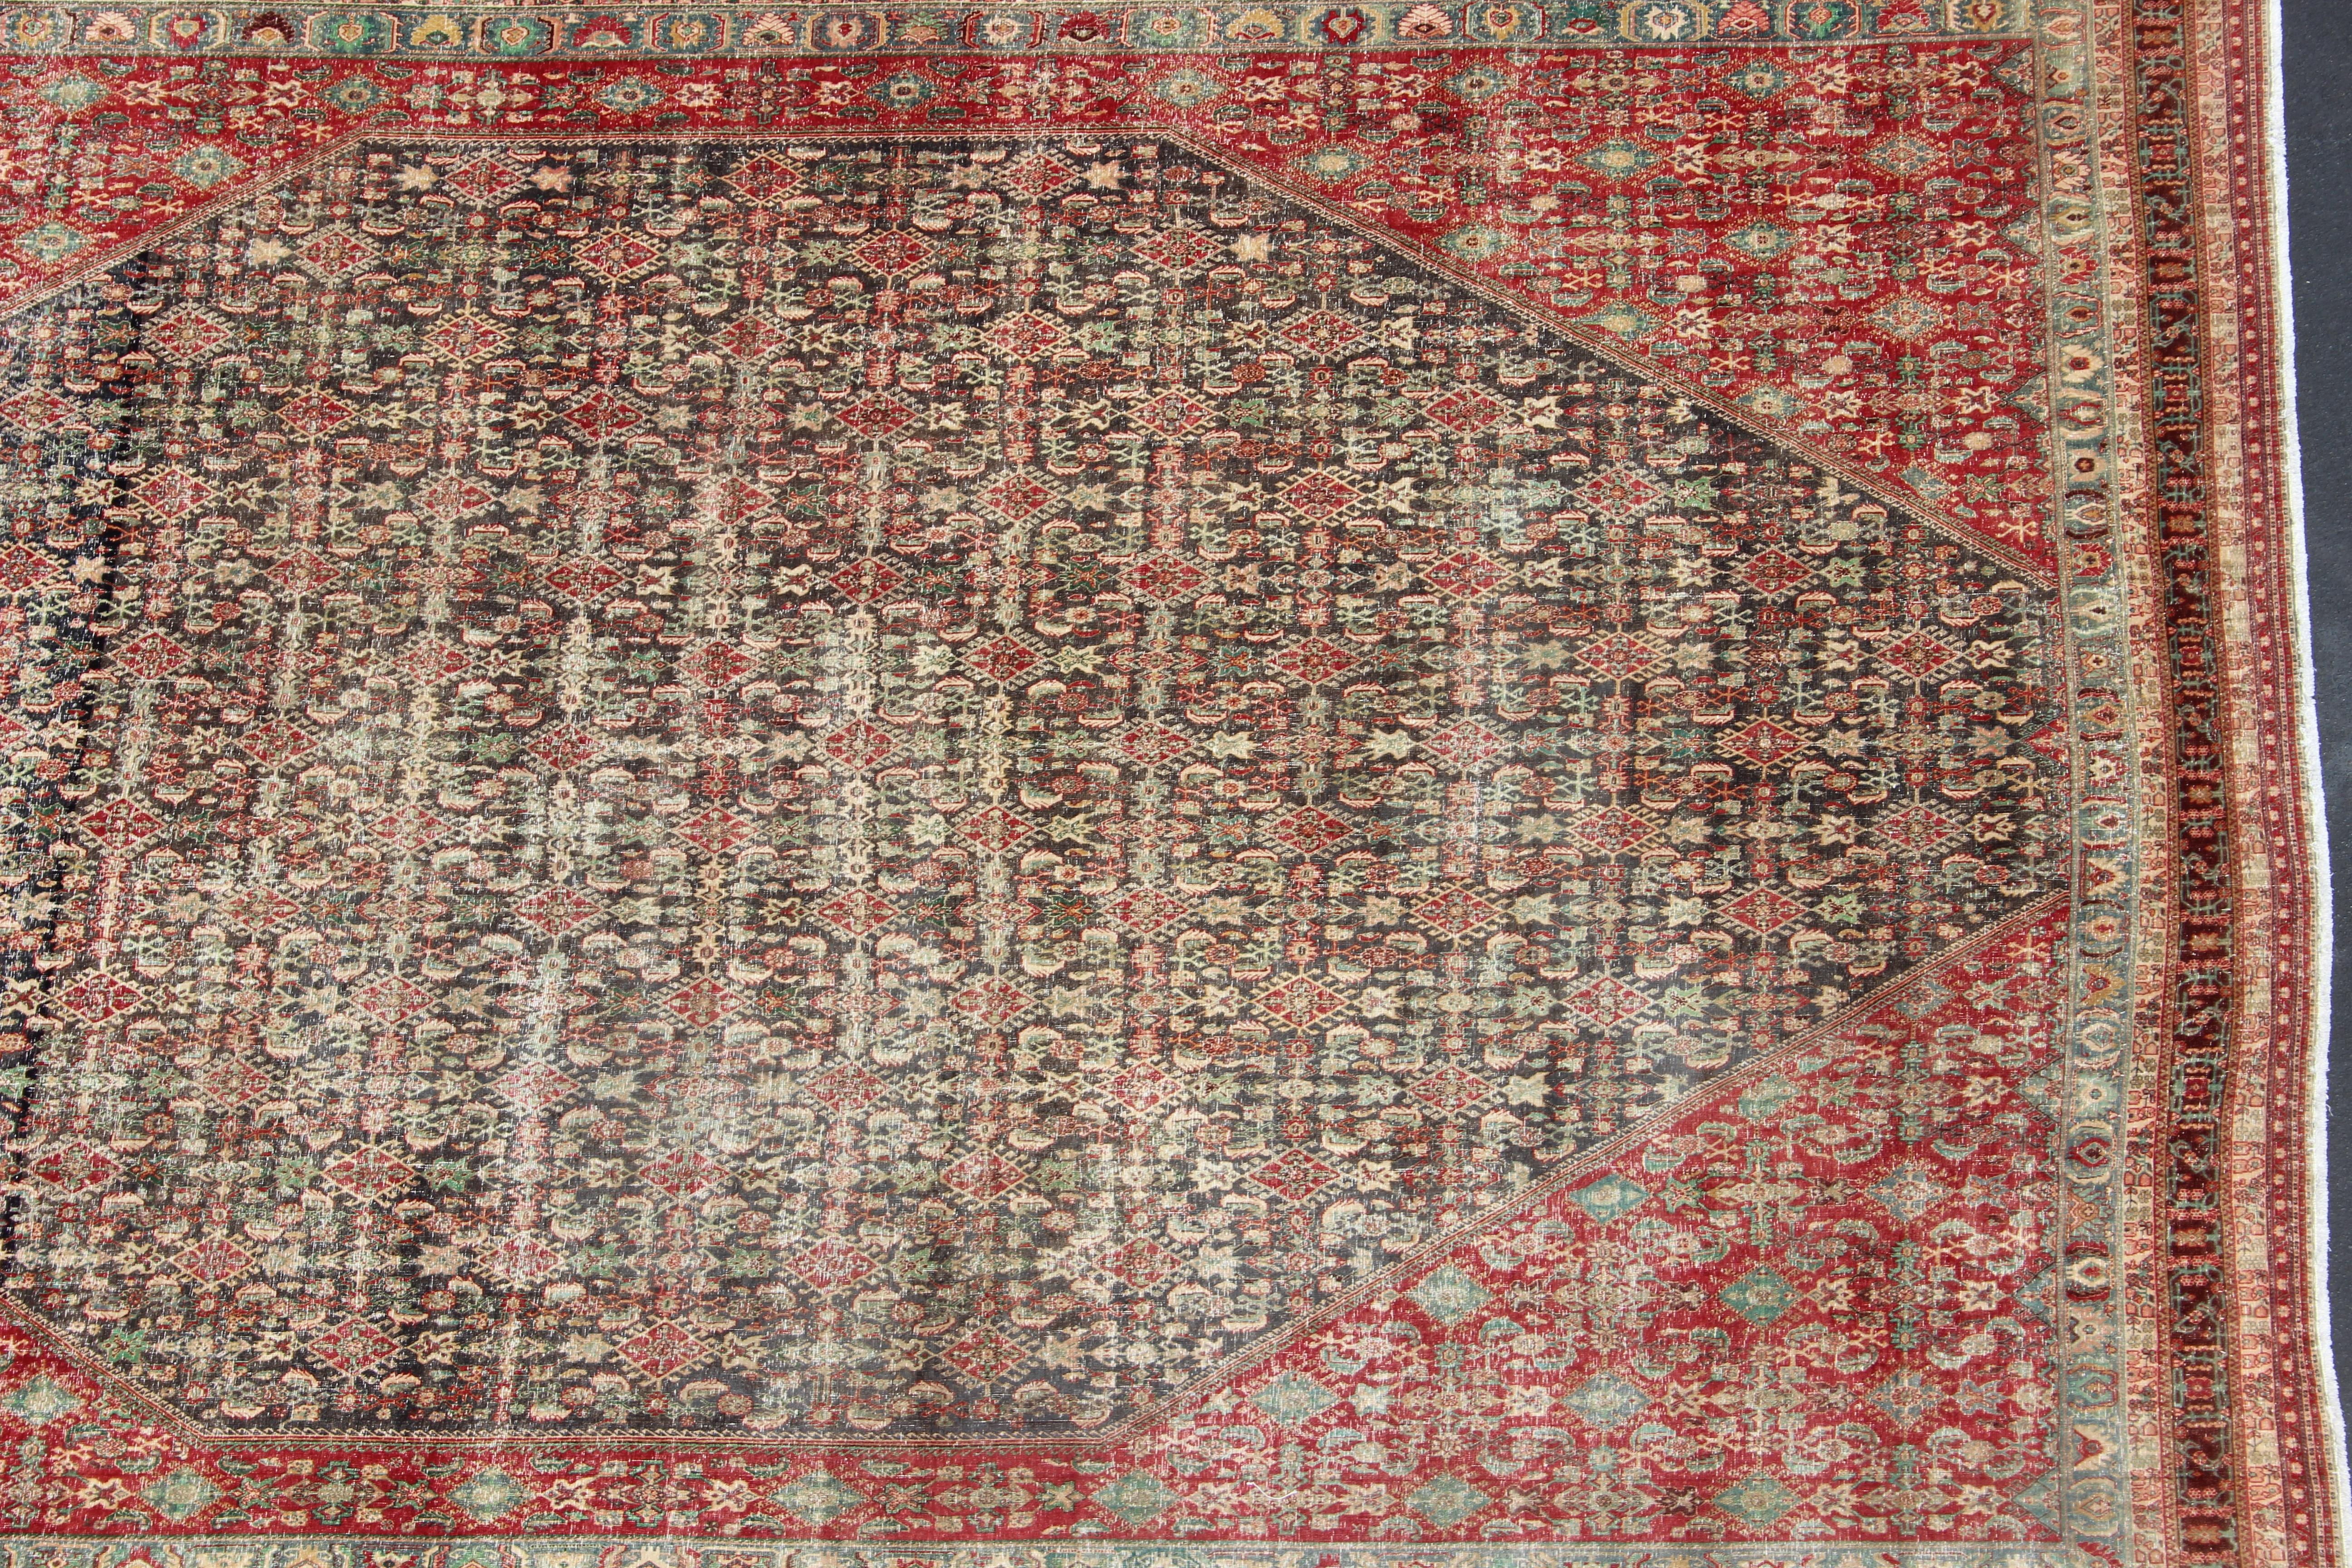 Wool Colorful Large Persian Antique Qashqai rug with A Beautiful Tribal Motif Design For Sale